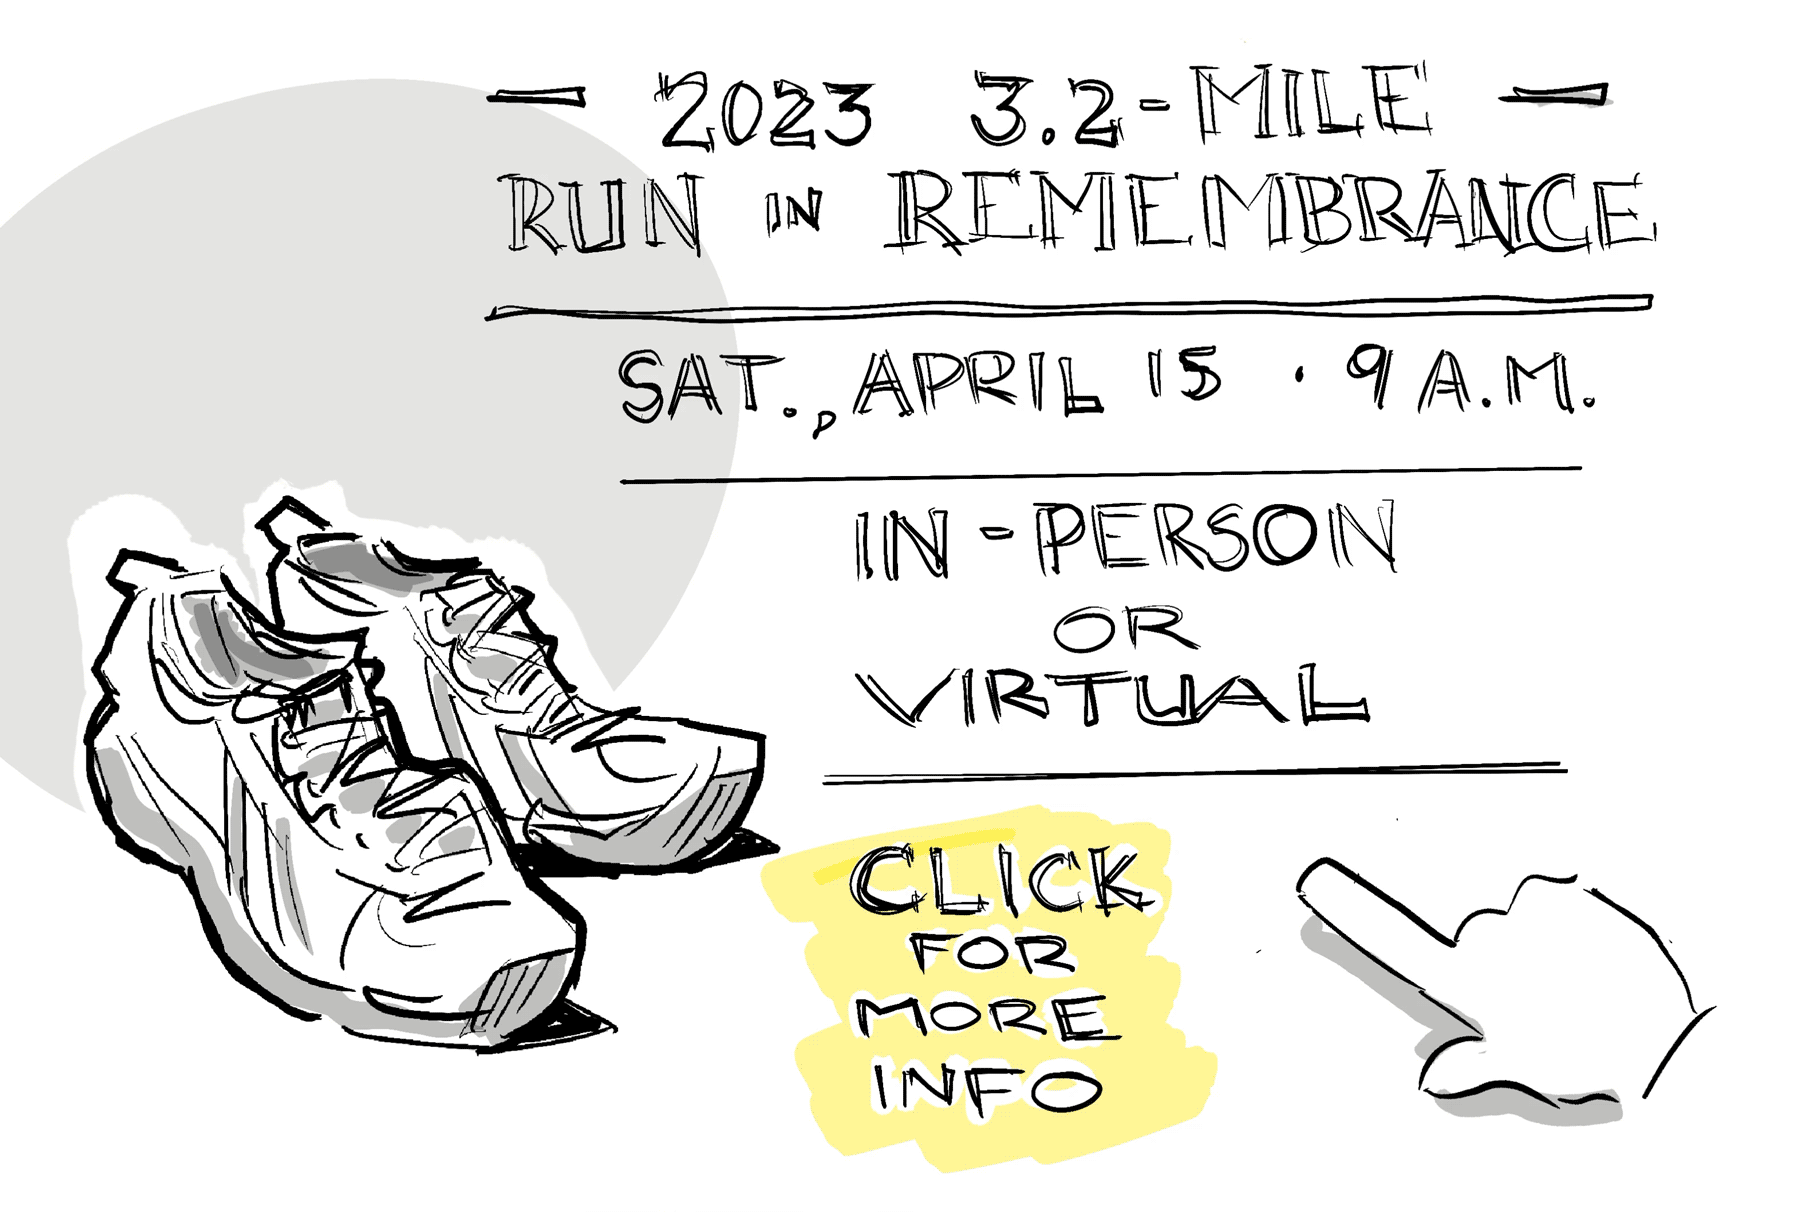 Animated promotion of the 2023 run in remembrance on April 15 at 9am